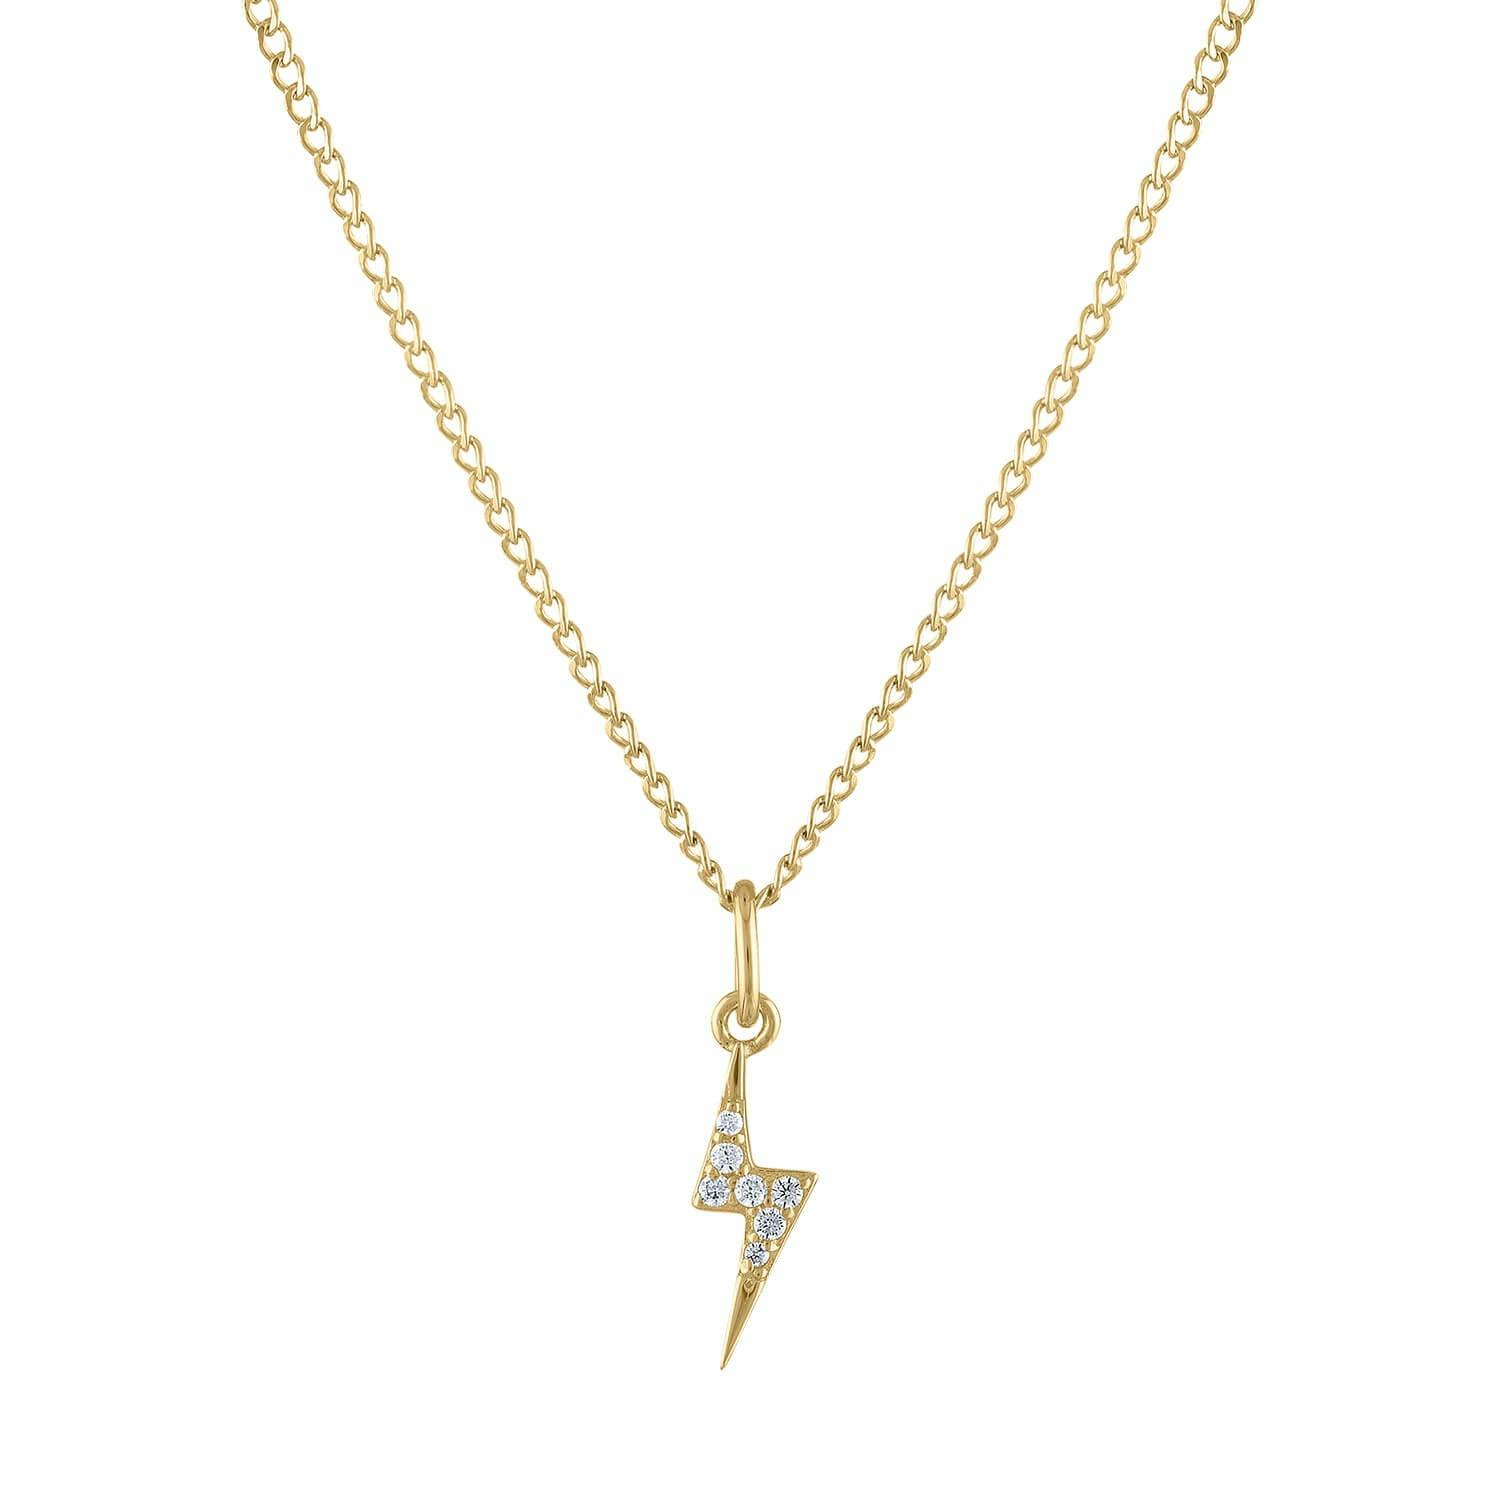 Mini Pave Lightning Charm Necklace in Gold